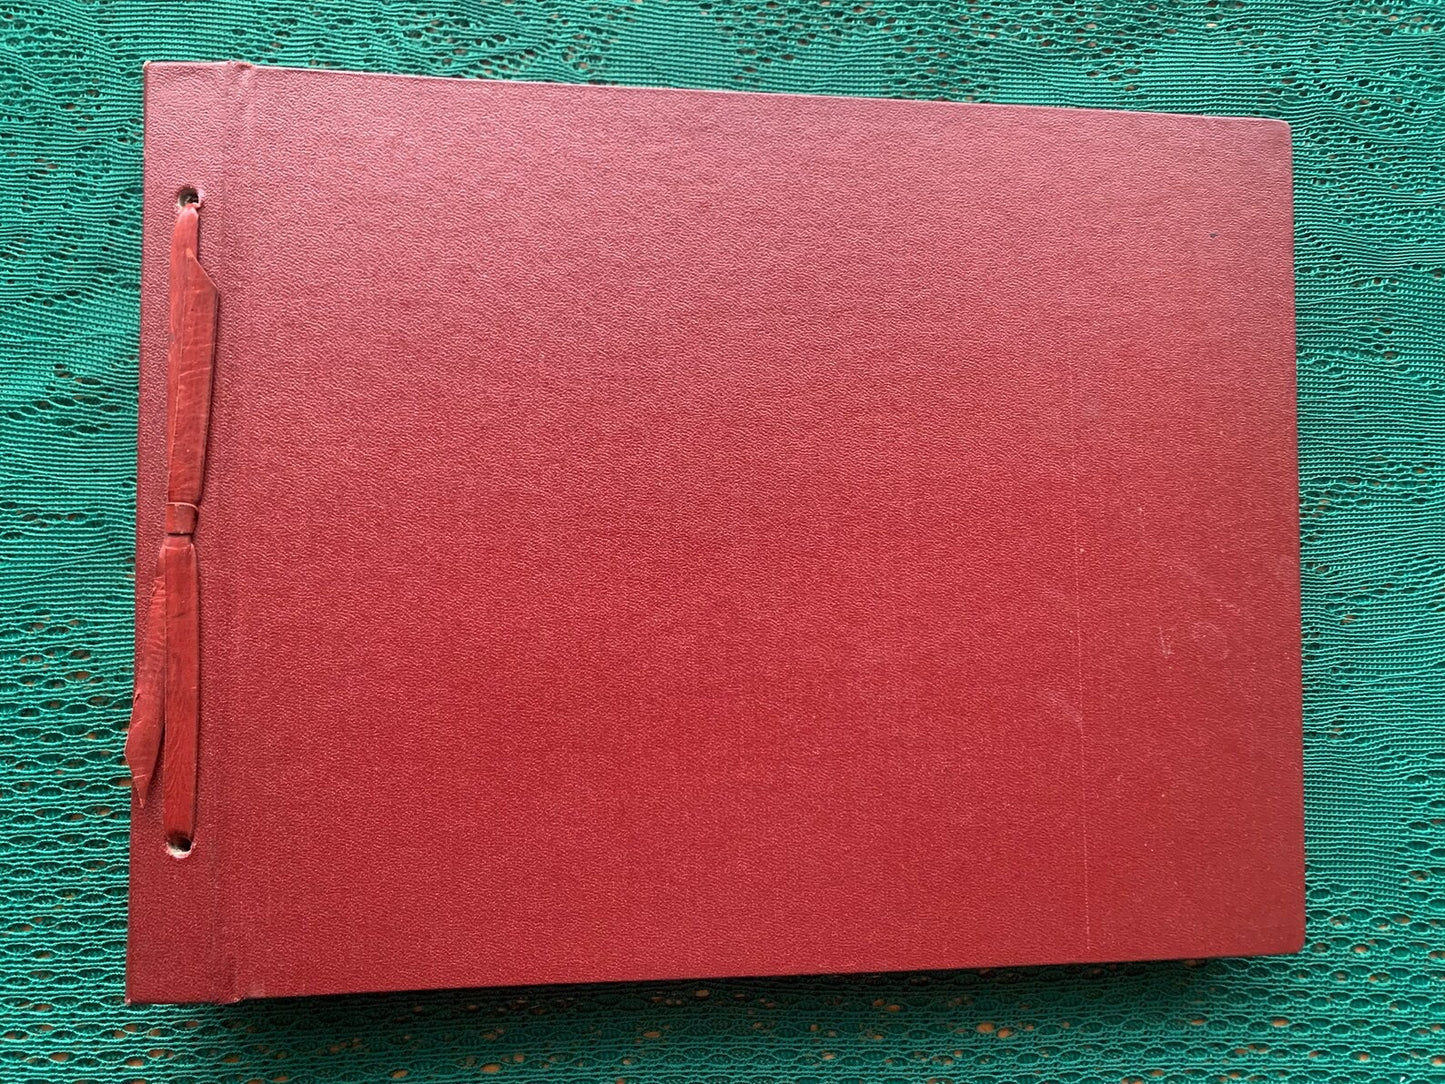 Vintage unused photo album from 1970s - Red Soviet photo album with strong cardboard sheets - Journaling, scrapbooking album - Craft supply